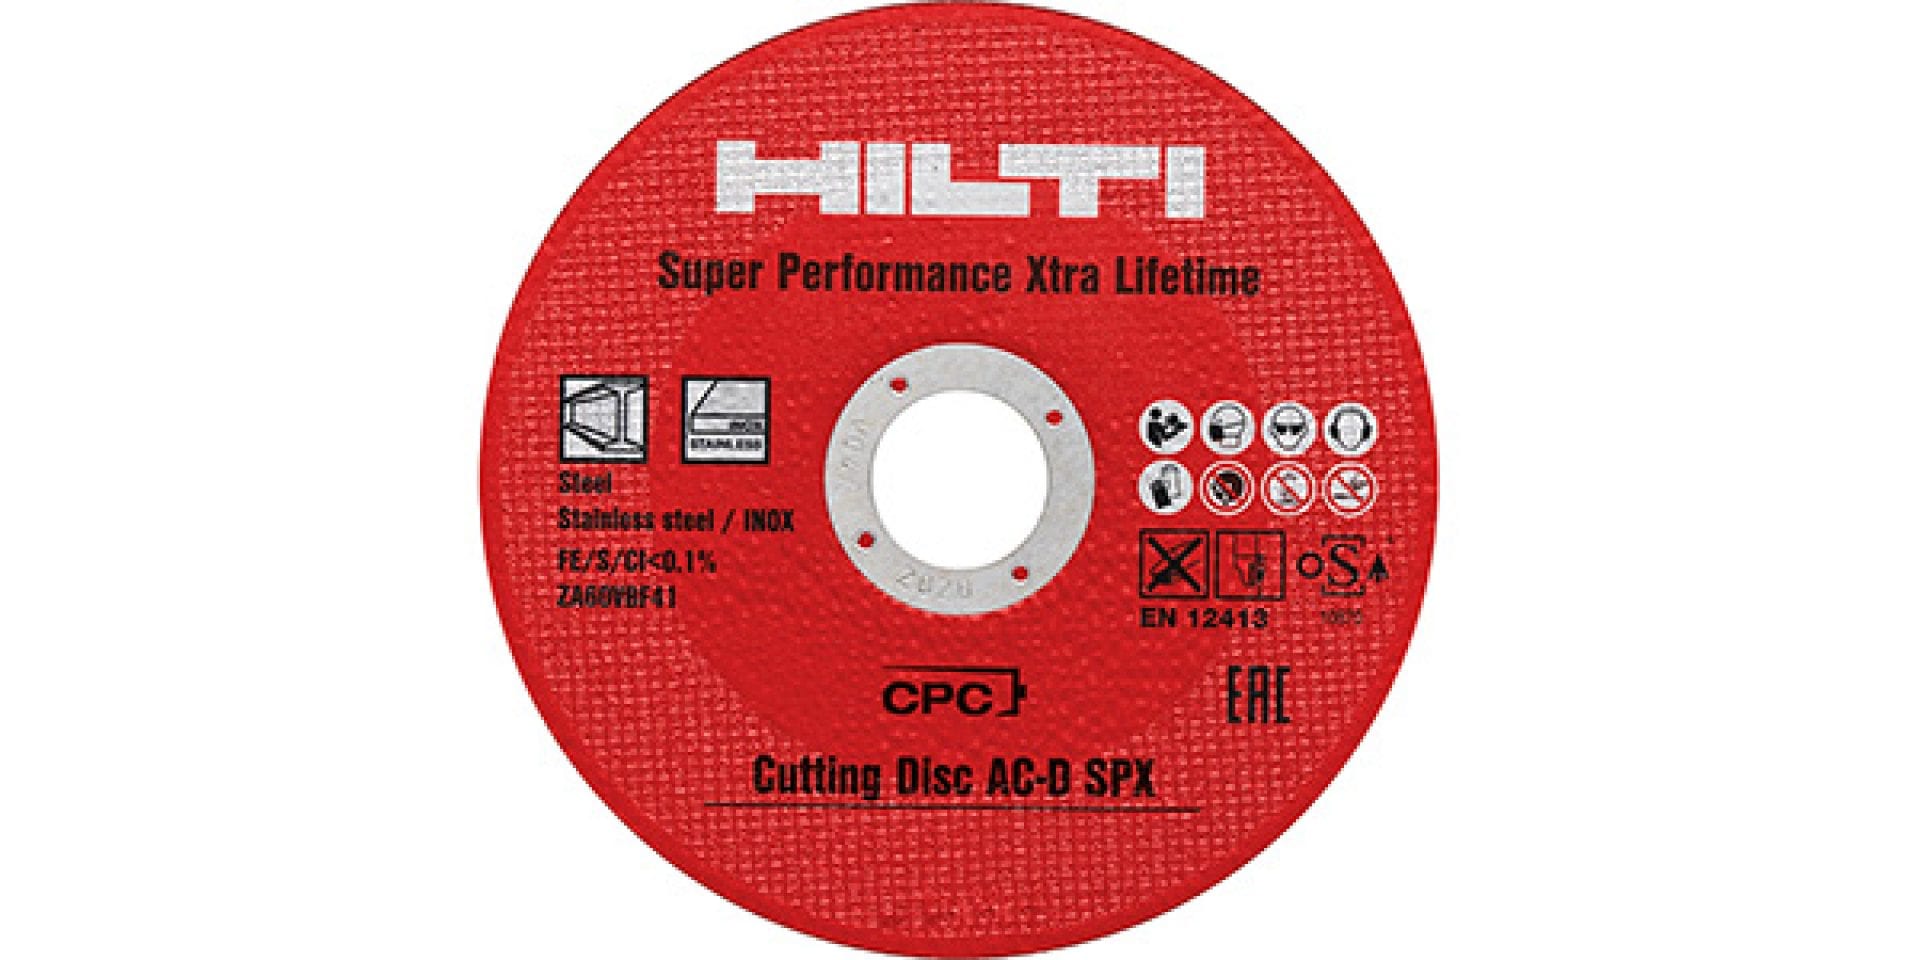 Ultimate abrasive cutting disc for metals offering extra-long lifetime and extra-high cutting speed.